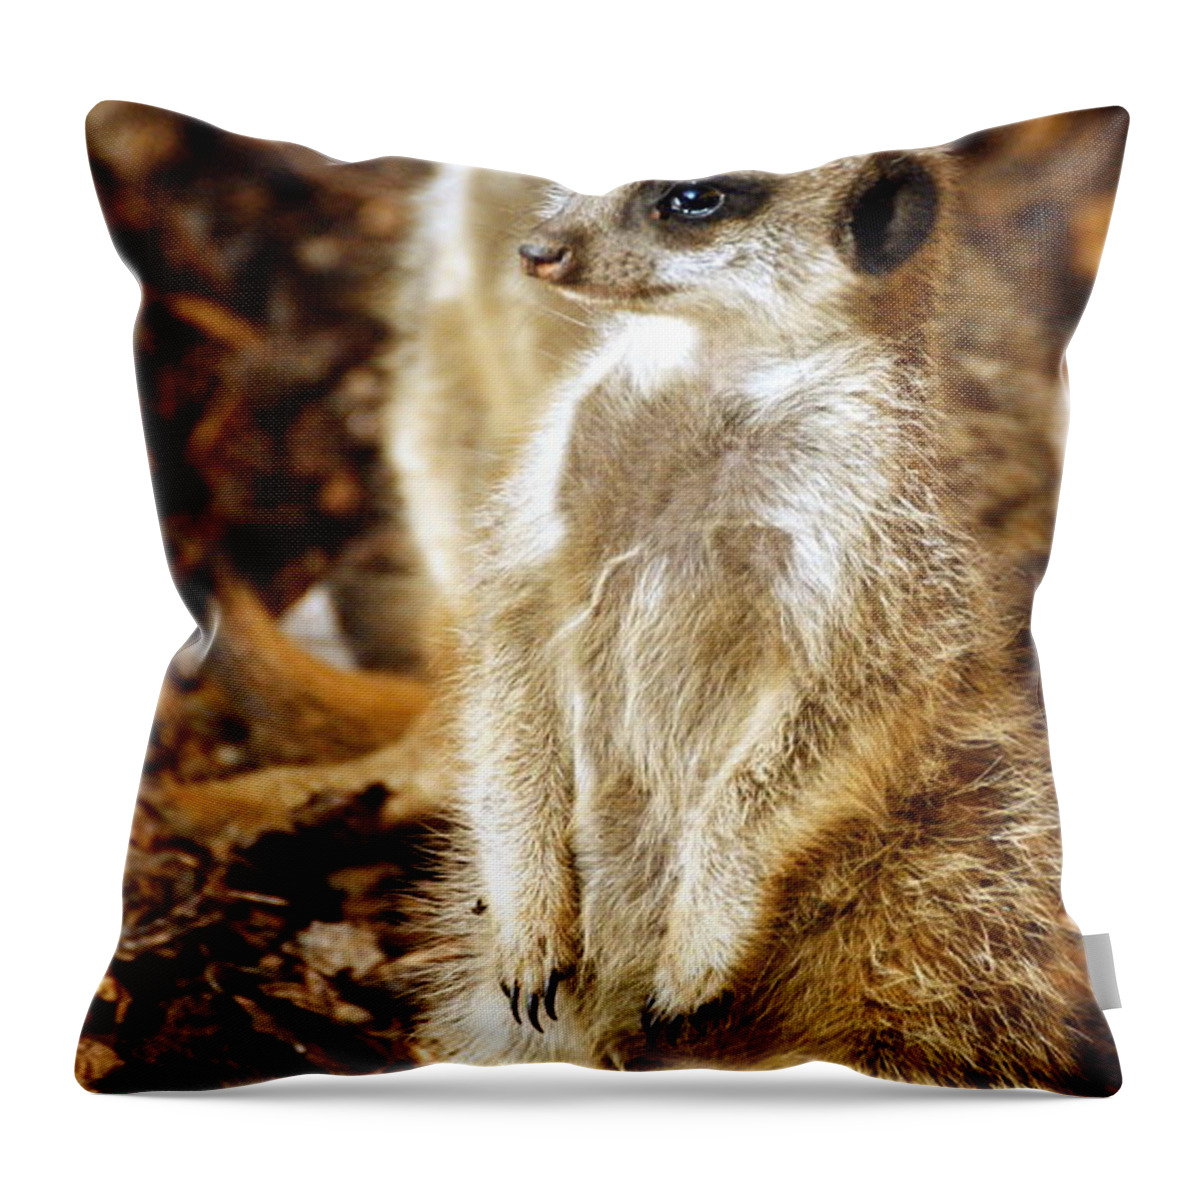 Animal Throw Pillow featuring the photograph Double Trouble by Chris Boulton